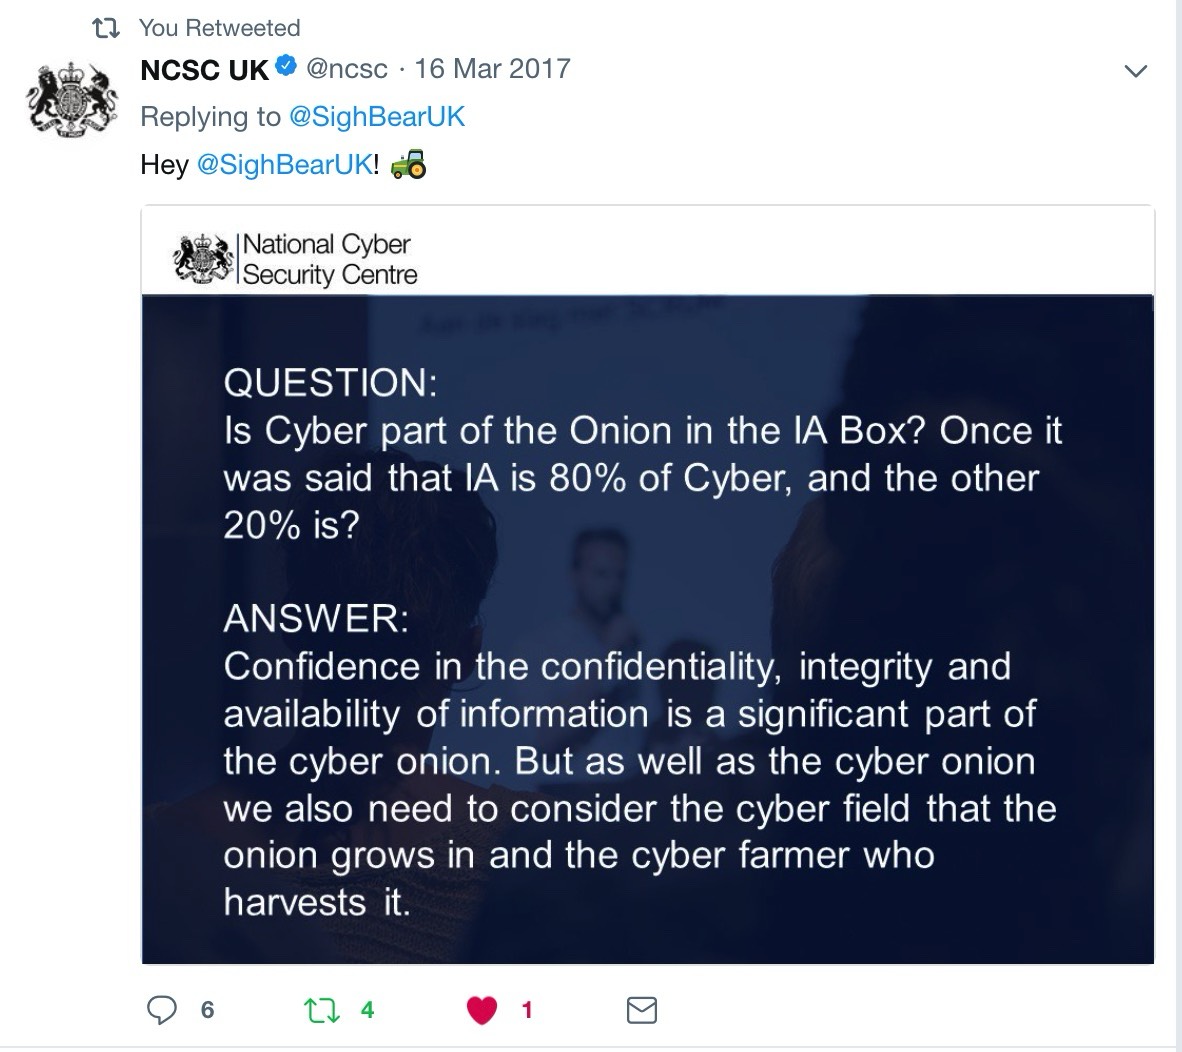 What is the other 20% of Cyber?